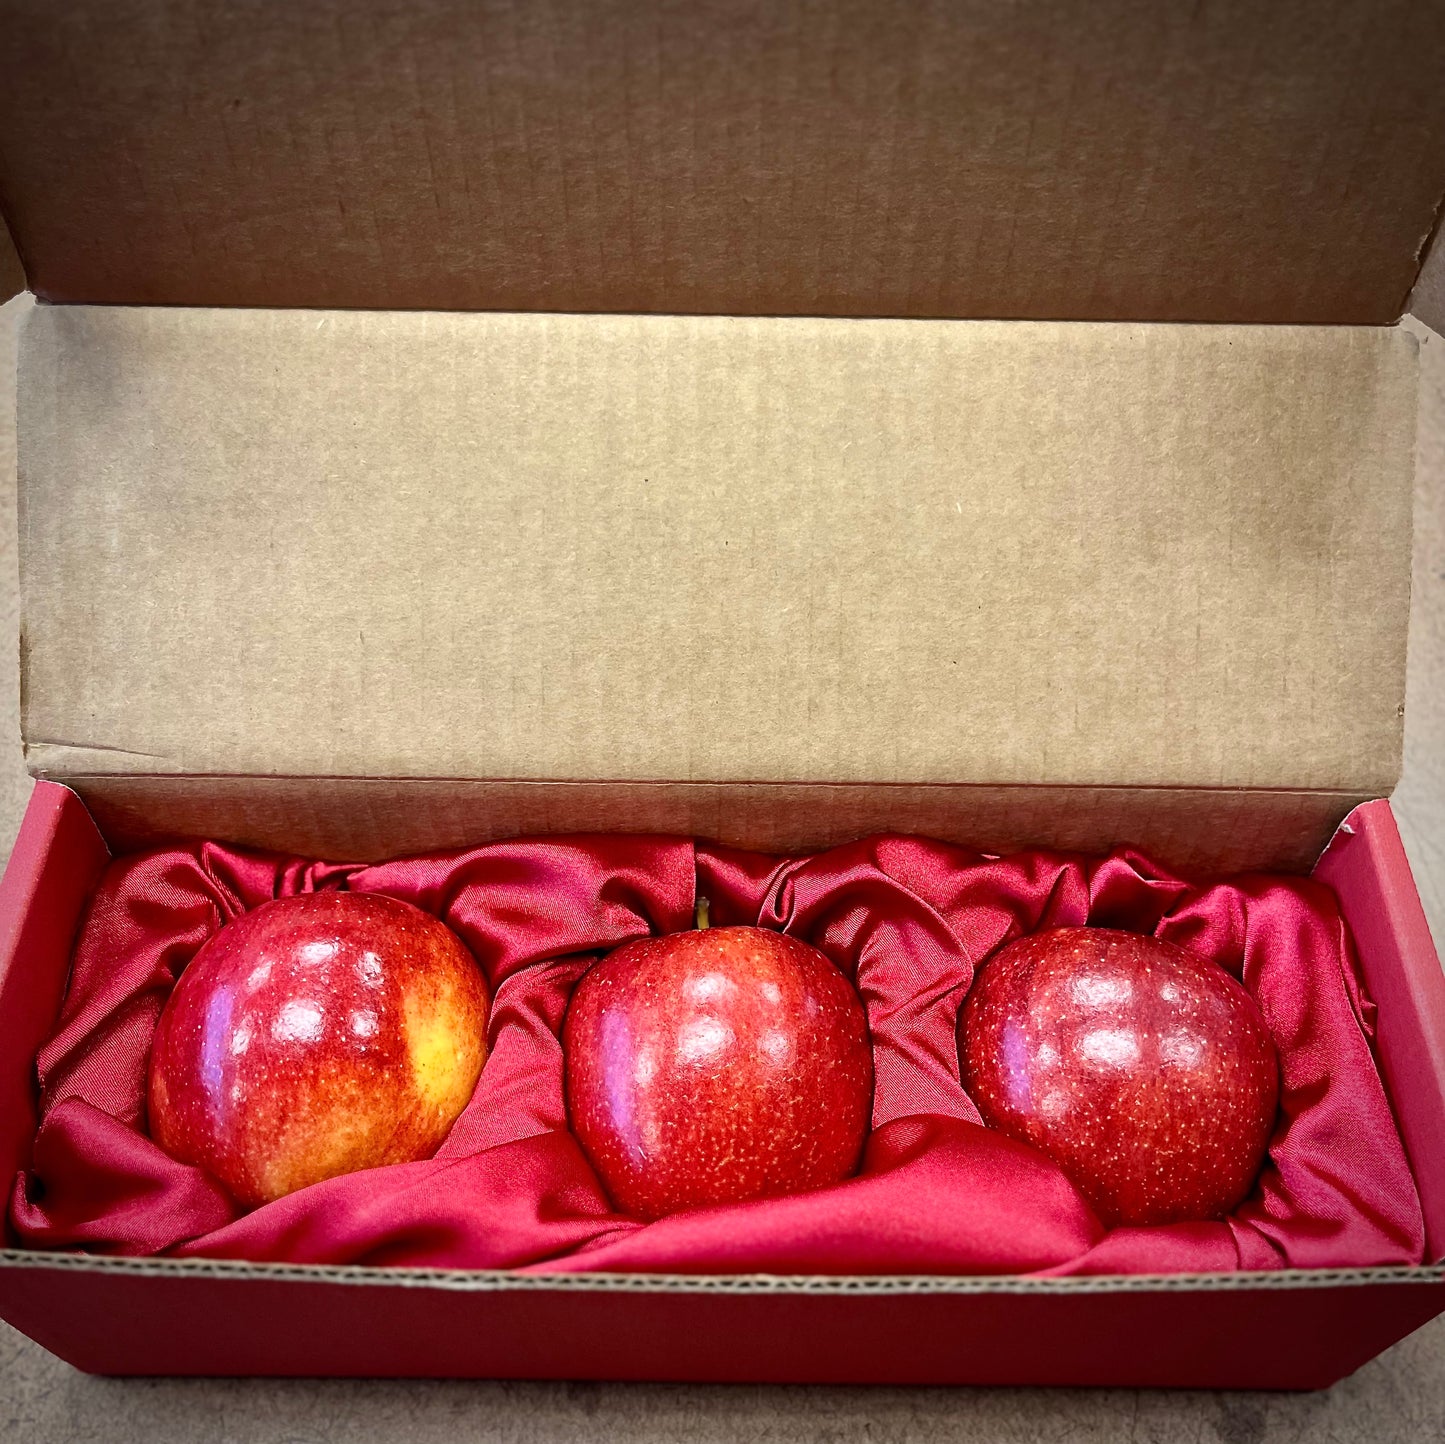 **FEATURED APPLE** - Envy Apples